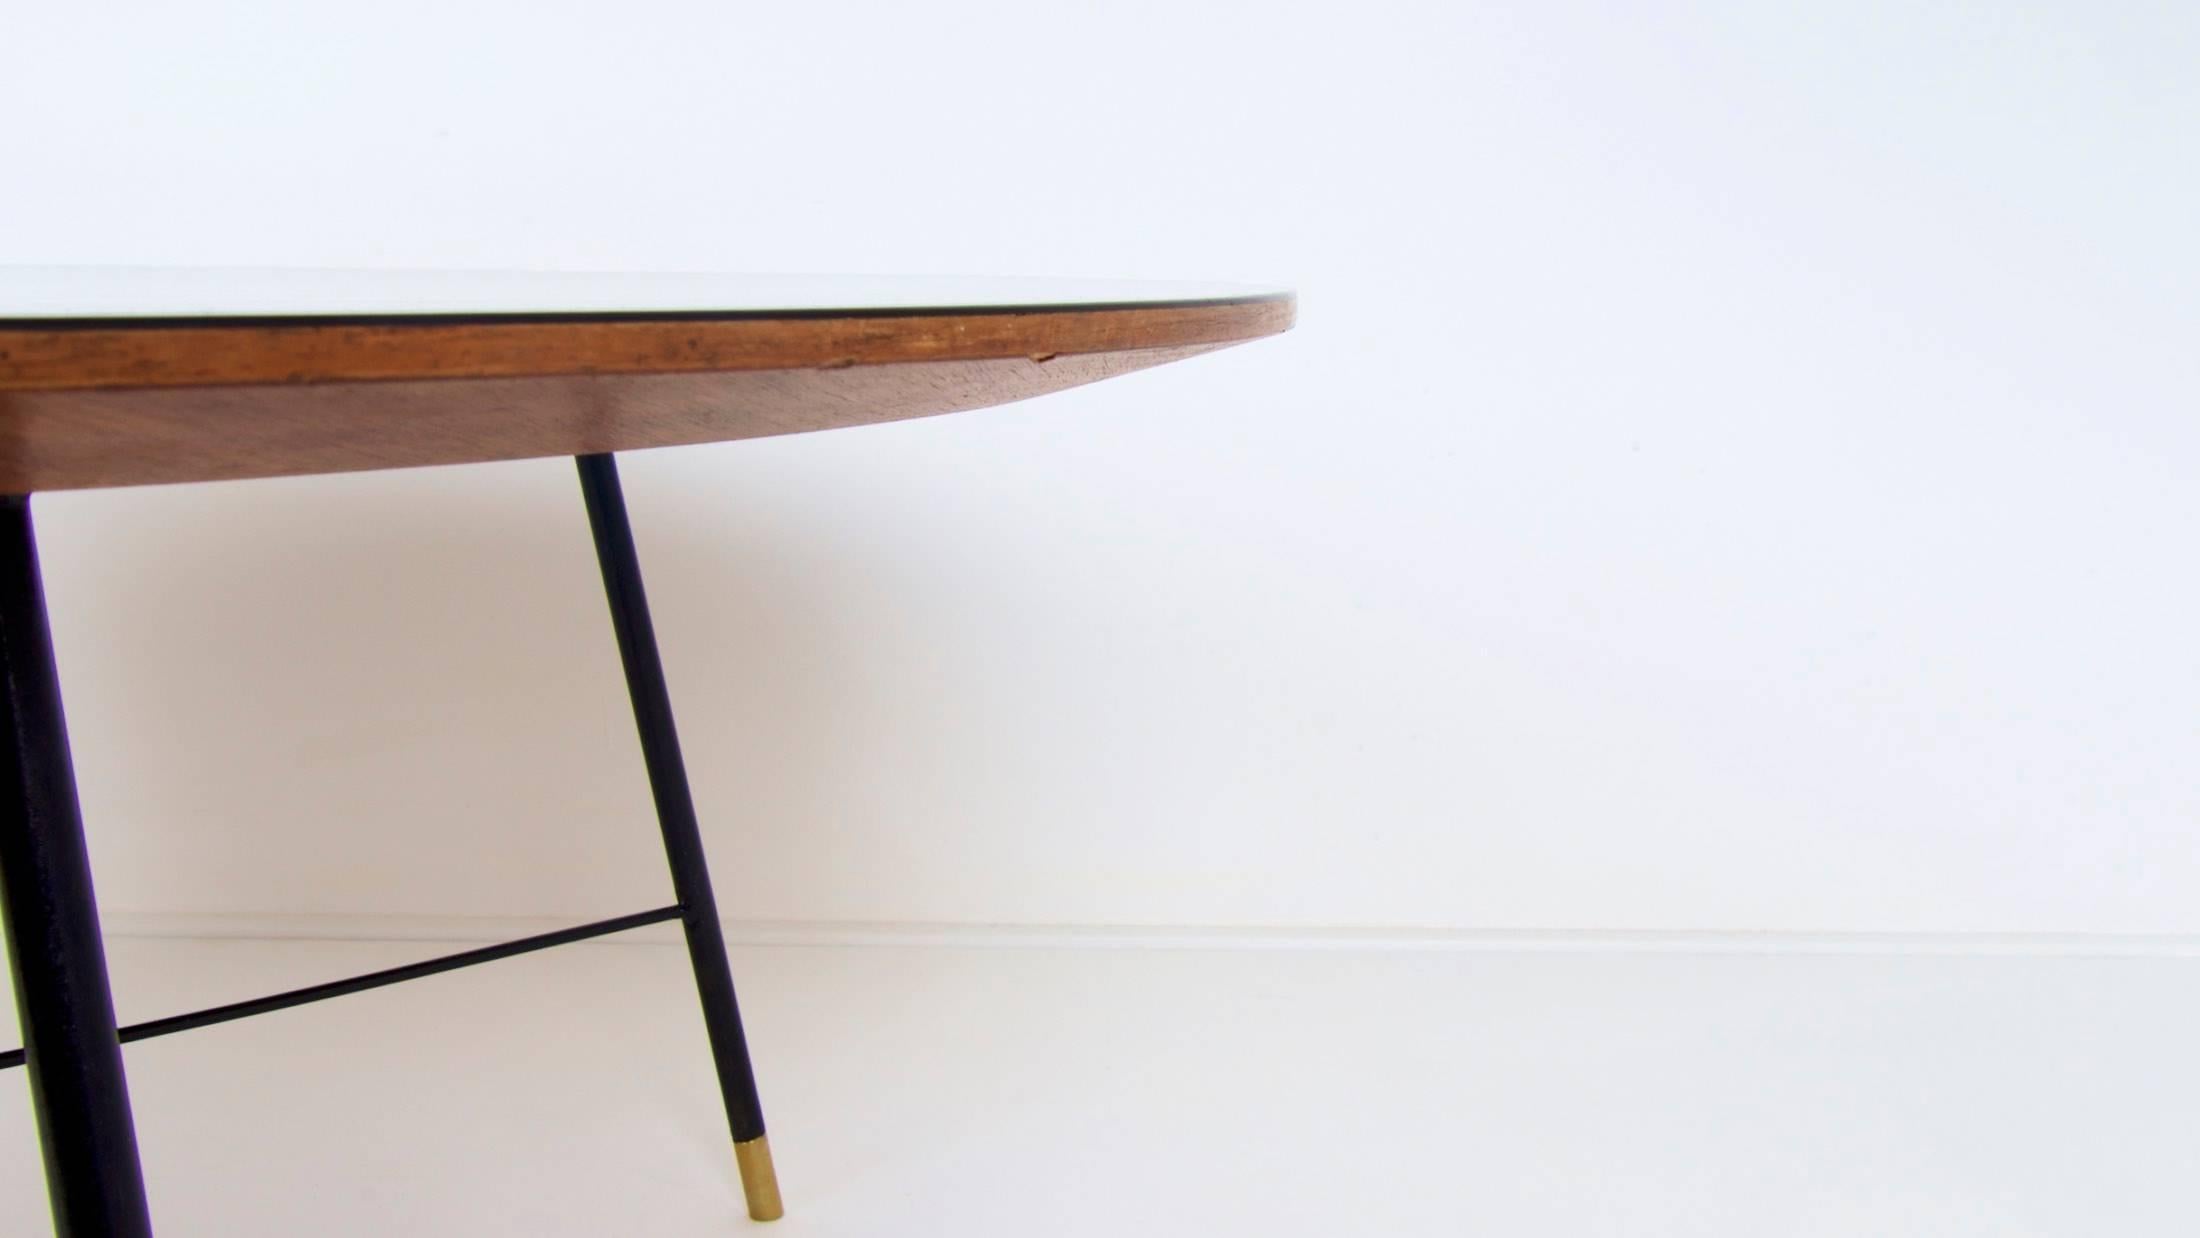 Lacquered Ico Parisi Circular Coffee Table for Cassina, circa 1950 For Sale